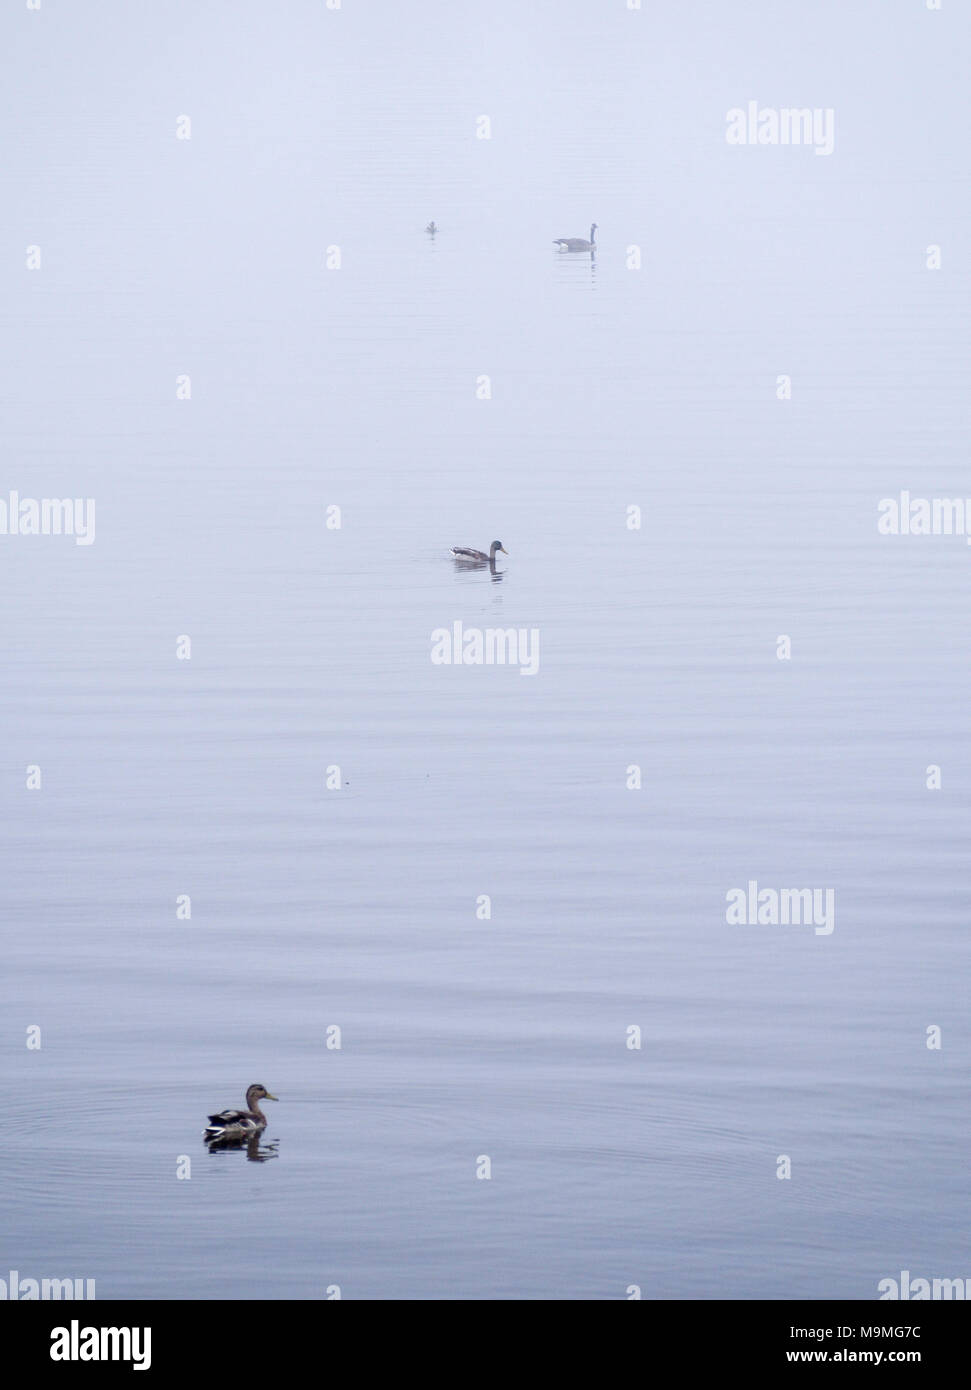 Ducks and Goose in the Fog: Three ducks and one goose float on the calm waters of a pond where all detail is erased by the thick morning fog. Stock Photo